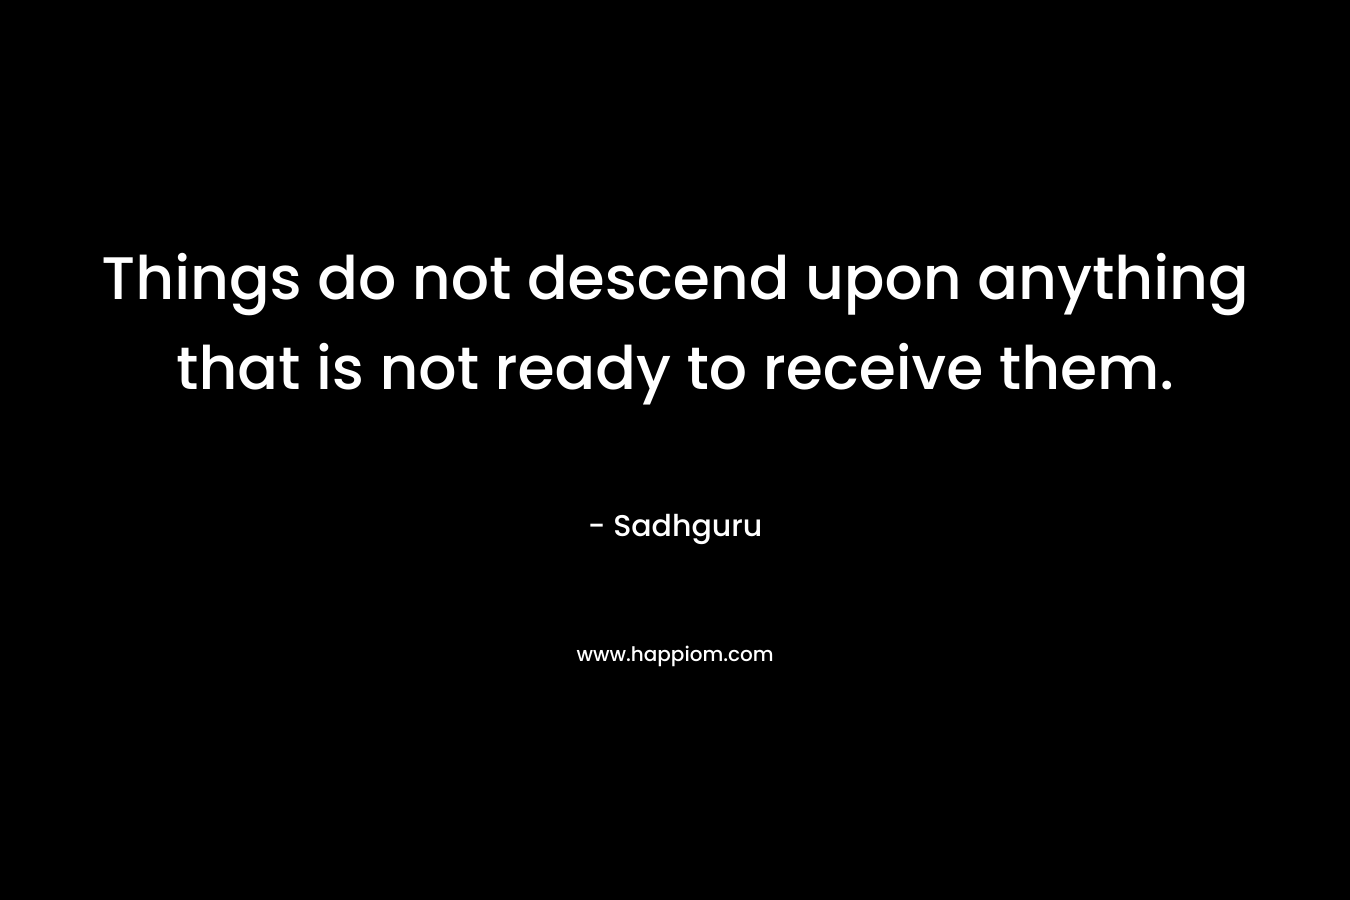 Things do not descend upon anything that is not ready to receive them.